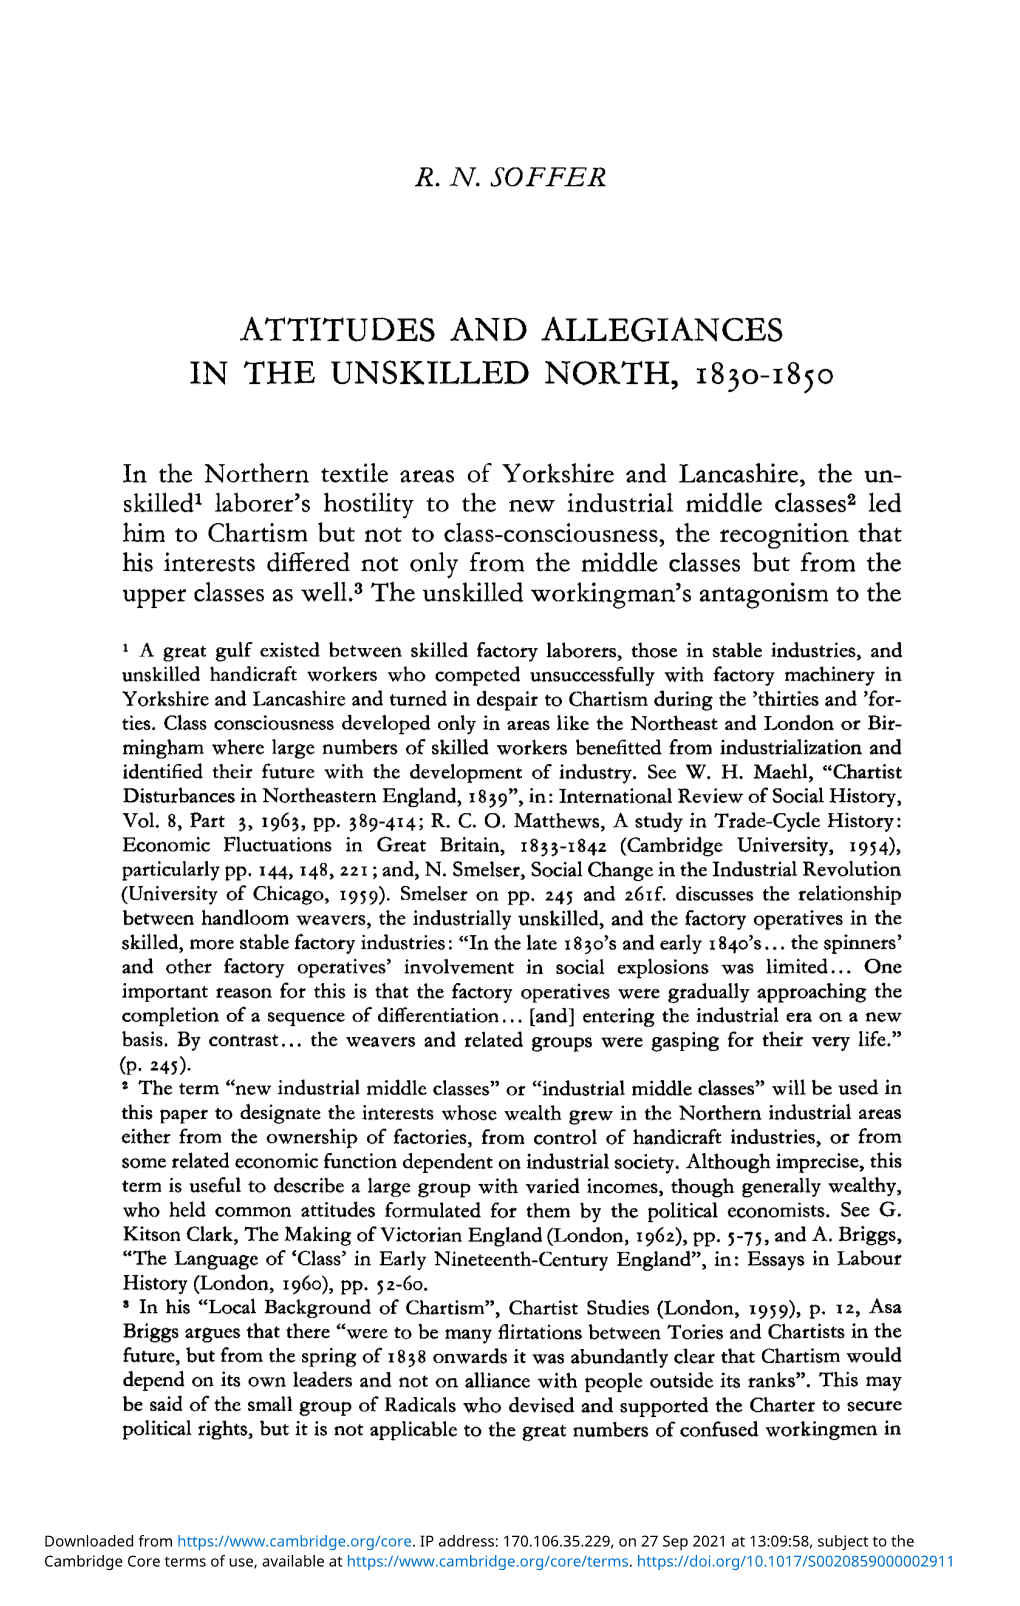 Attitudes and Allegiances in the Unskilled North, 1830–1850